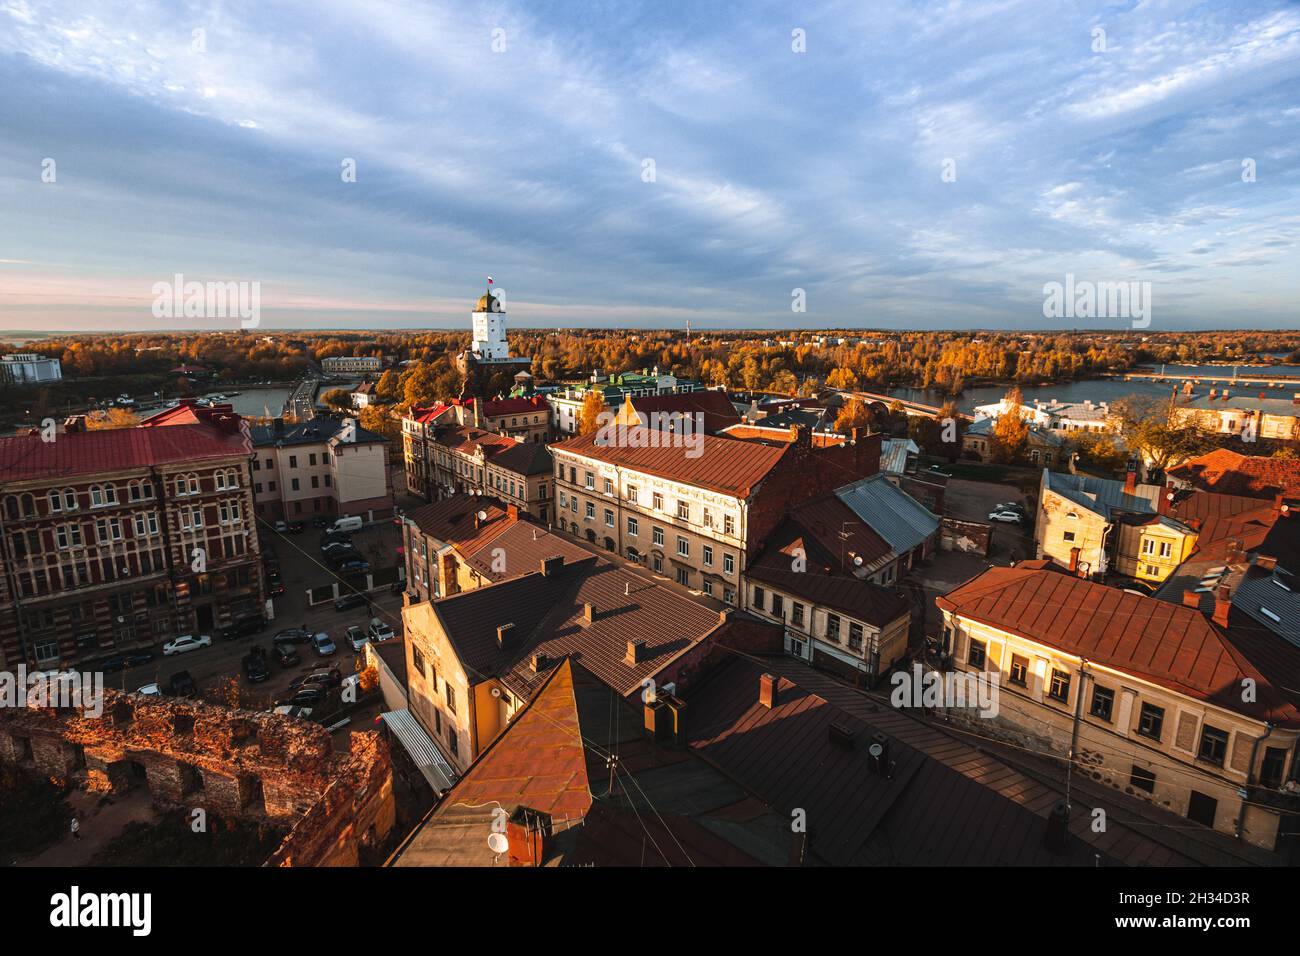 Aeral view of the Tower of St. Olaf and ruined Old cathedral in Vyborg from the Clock Tower in autumn Stock Photo